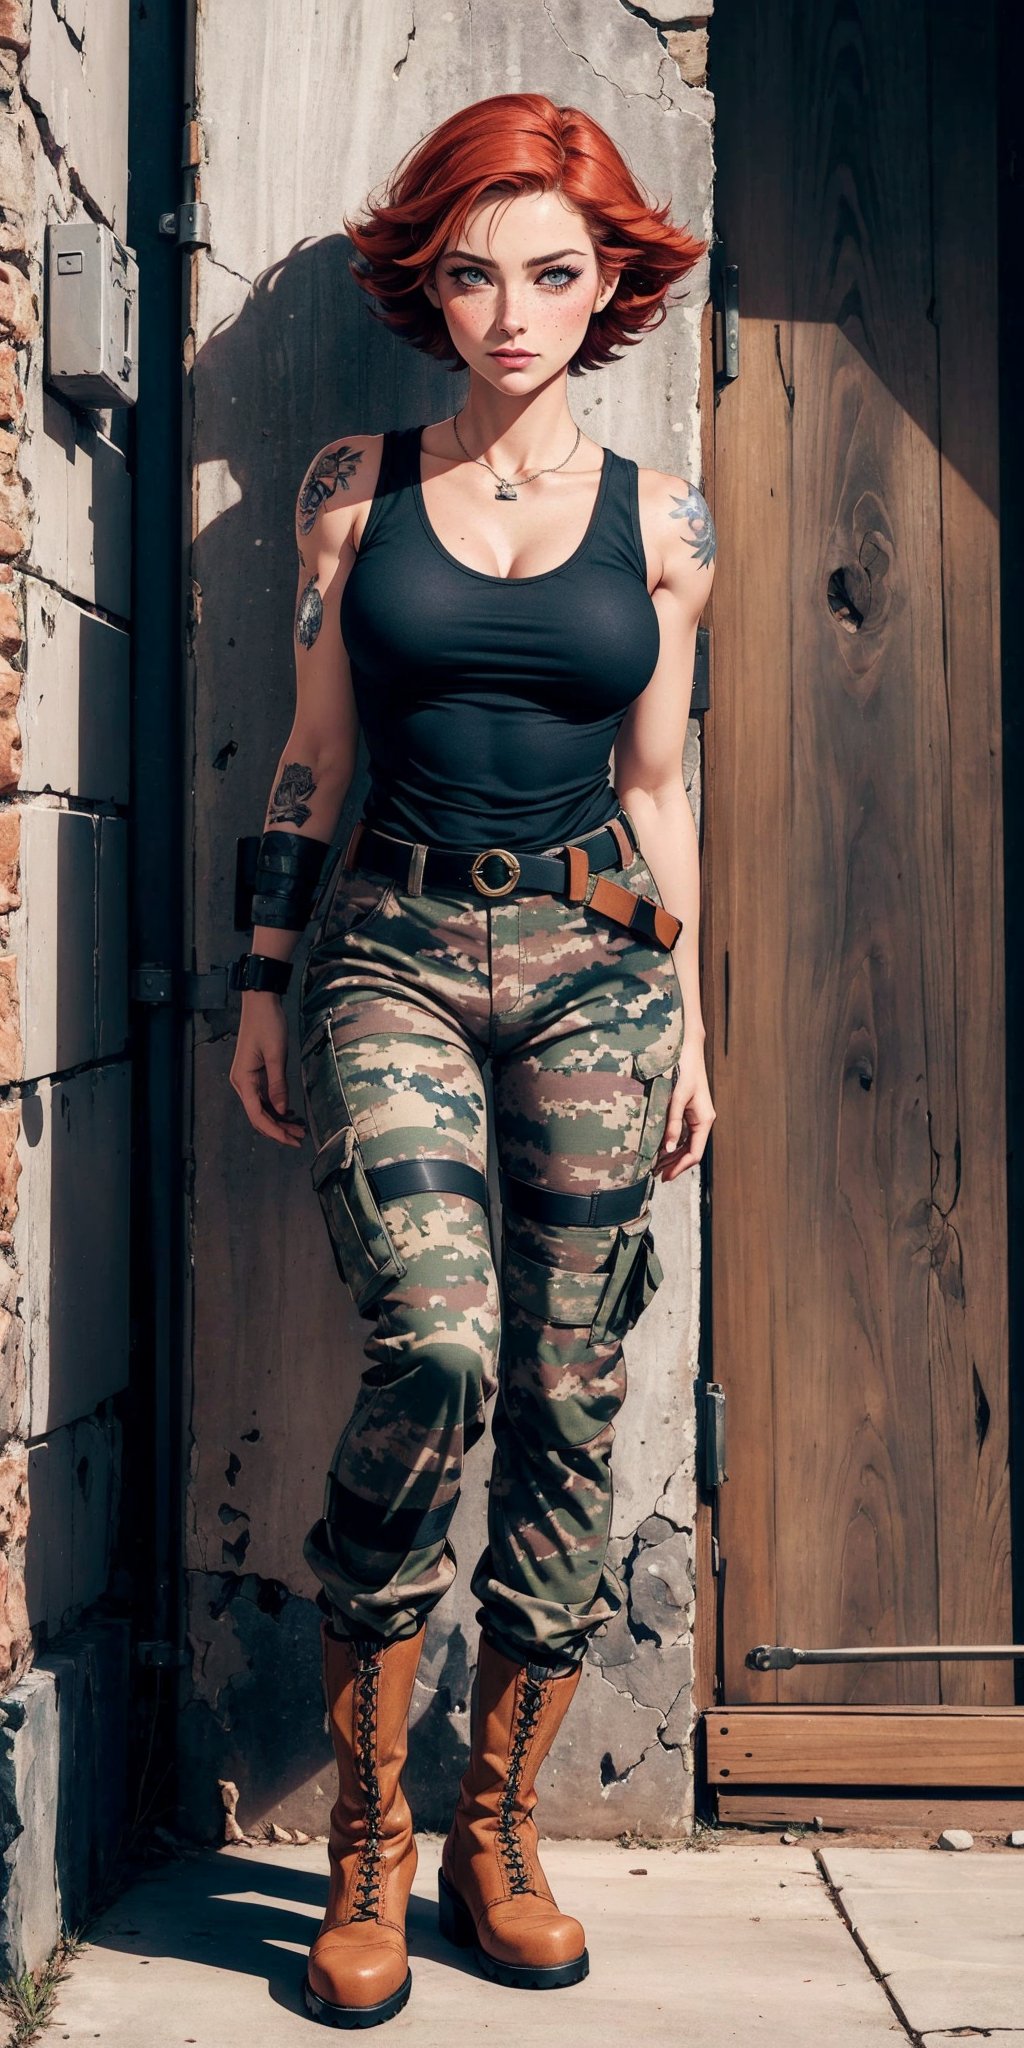 masterpiece,best quality,High quality,meryl, red hair, picture perfect face,blush, freckles,makeup,long eyelashes, perfect female body, black tank top,belt, camouflage pants, cobat boots, military arm tattoo, dogtag,
military base, 